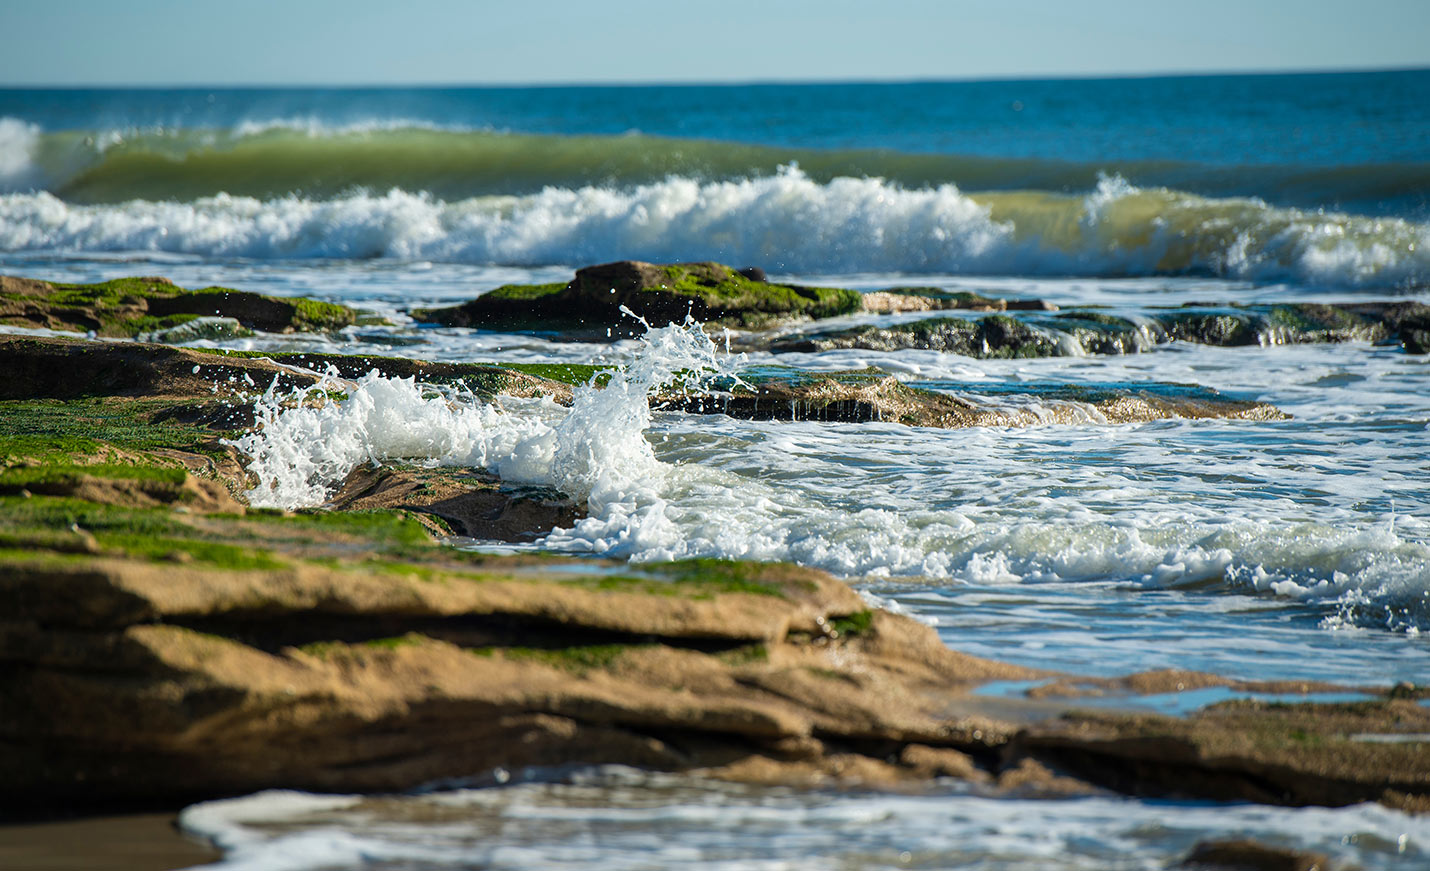 Coquina rocks on the shoreline with waves coming in